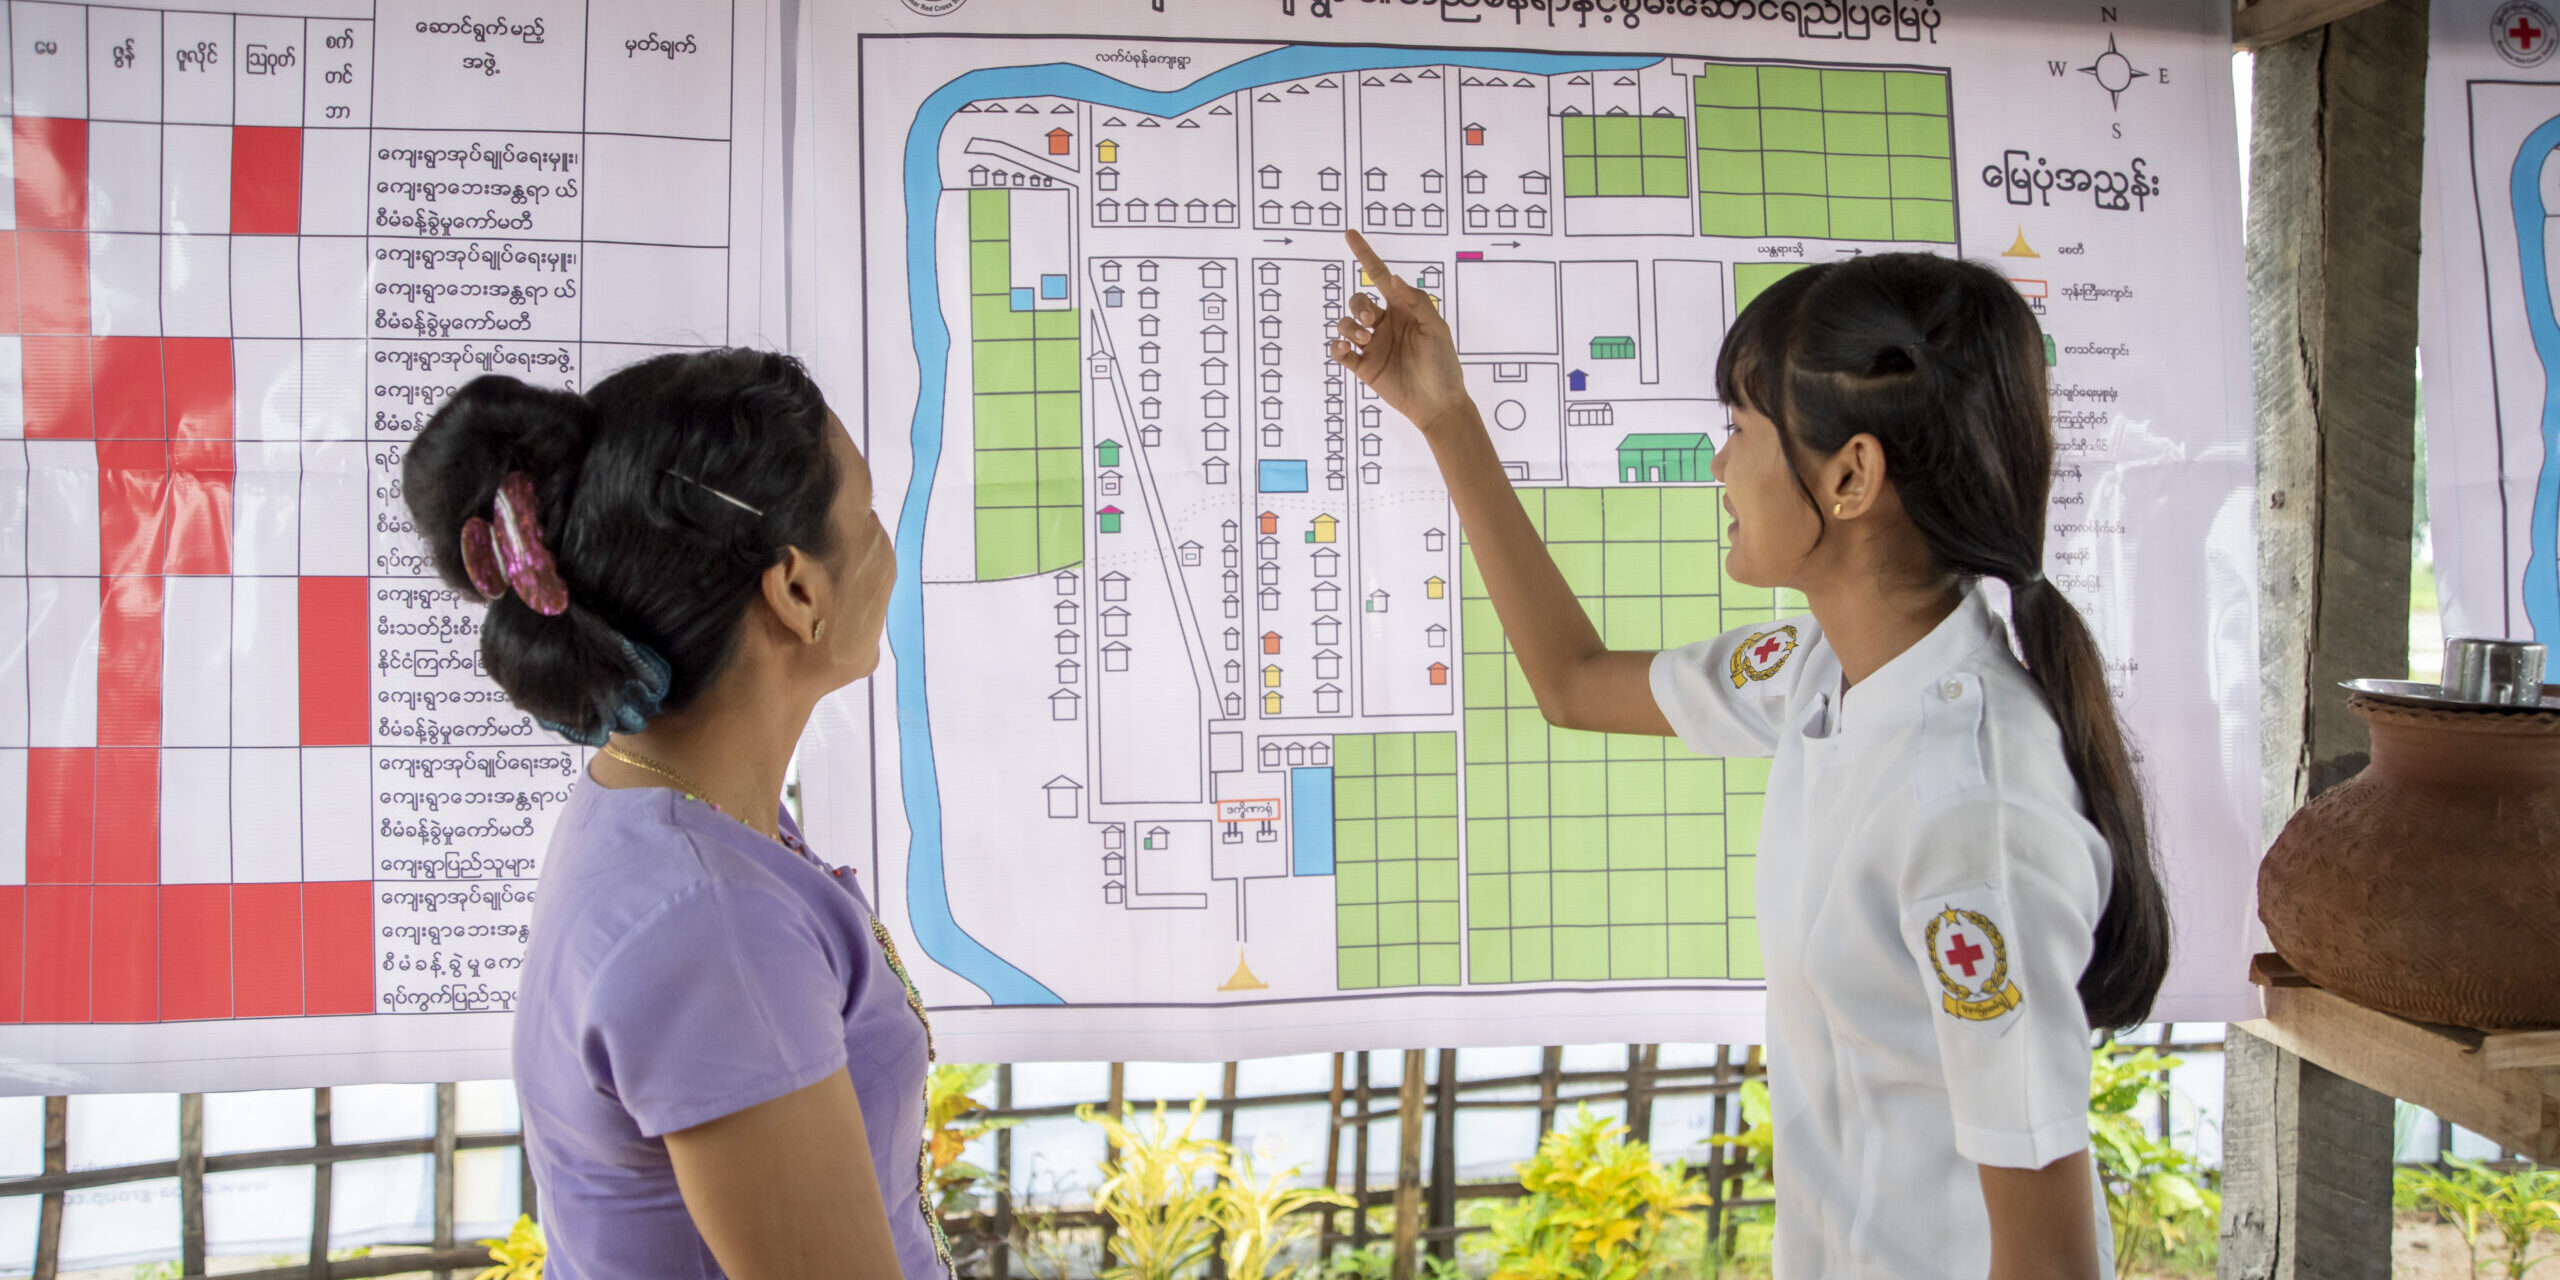 July 9, 2019. Kim Chaung village, Bago, Myanmar. Residents (Ma Sandar Win and Ma Han Thae Oo) of Kim Chaung village, Myanmar discuss a community map hanging in the town center. Developed with help from the Red Cross, the map can be used to mitigate disaster risks. Communities like this one work together to identify their risks—such as flood zones— as well as resources they can utilize during disasters. Maps show homes, high-risk areas, evacuation routes, locations of handicapped residents and the elderly (who may need help evacuating), and safe spaces to seek shelter. This rural community—dotted with rice patties and farmland—experiences regular floods and is at-risk of earthquakes and strong storms.

The American Red Cross works alongside the Myanmar Red Cross to prepare disaster-prone communities for cyclones, floods, tsunamis, earthquakes, and other emergencies. We train and equip families with the tools they need to mitigate natural disaster risks and to be first responders when crises strike. In Myanmar, the American Red Cross teaches basic first aid, light search-and-rescue, and post-disaster epidemic control in 20 communities—in addition to running disaster simulations and forming village committees who mobilize when disasters hit. In 24 schools, we teach students basic first aid, light search-and-rescue, evacuation activities, and distribute emergency equipment—such as solar panels, fire extinguishers, megaphones, early warning speakers, first aid kits, and helmets. In Myanmar, some American Red Cross project sites are urban, while others sit in river deltas only accessible by boat. Note: The country of Myanmar is also known as “Burma.” Photo by Brad Zerivitz/American Red Cross